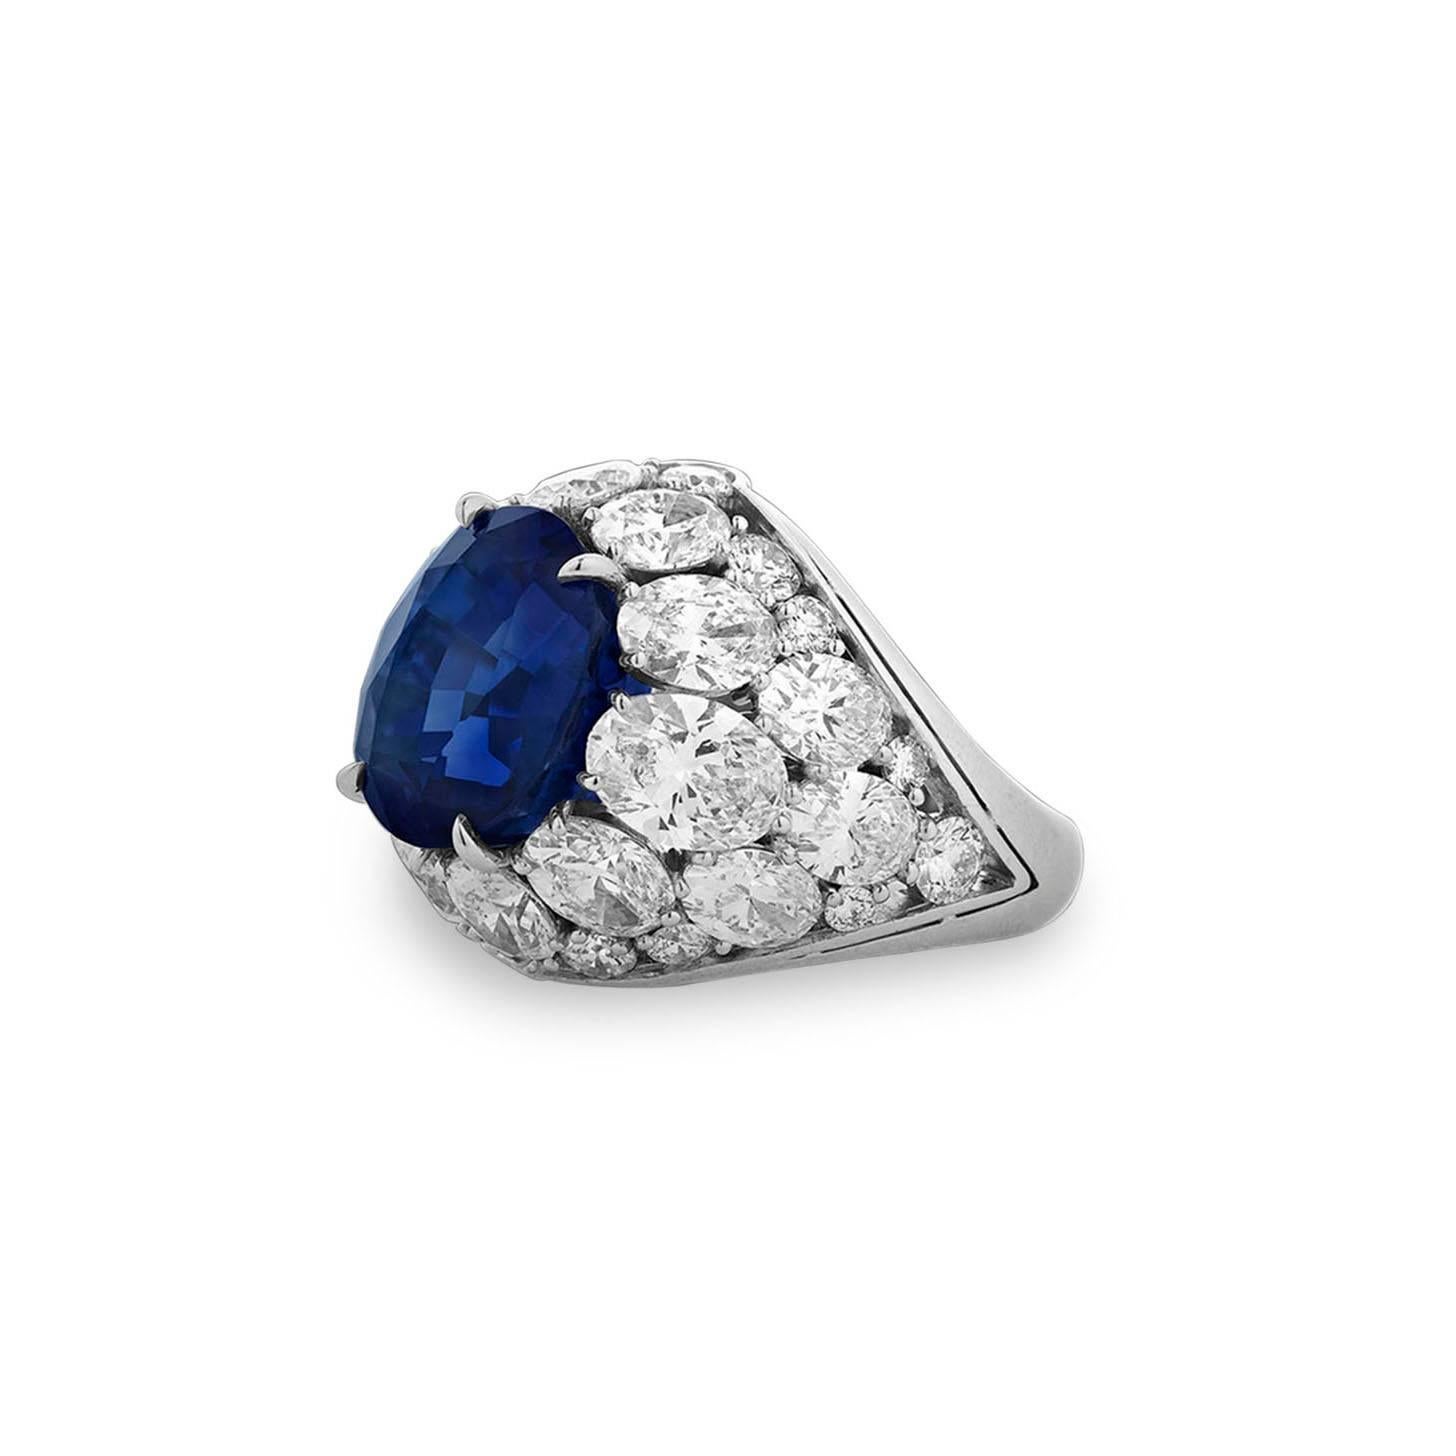 The breathtaking color and rarity of this natural, “no-heat” Burma sapphire is perfectly presented in this fabulous platinum ring. This 10.30-carat sapphire exhibits the perfect velvety blue, the color most prized in Burma sapphires. The stone is